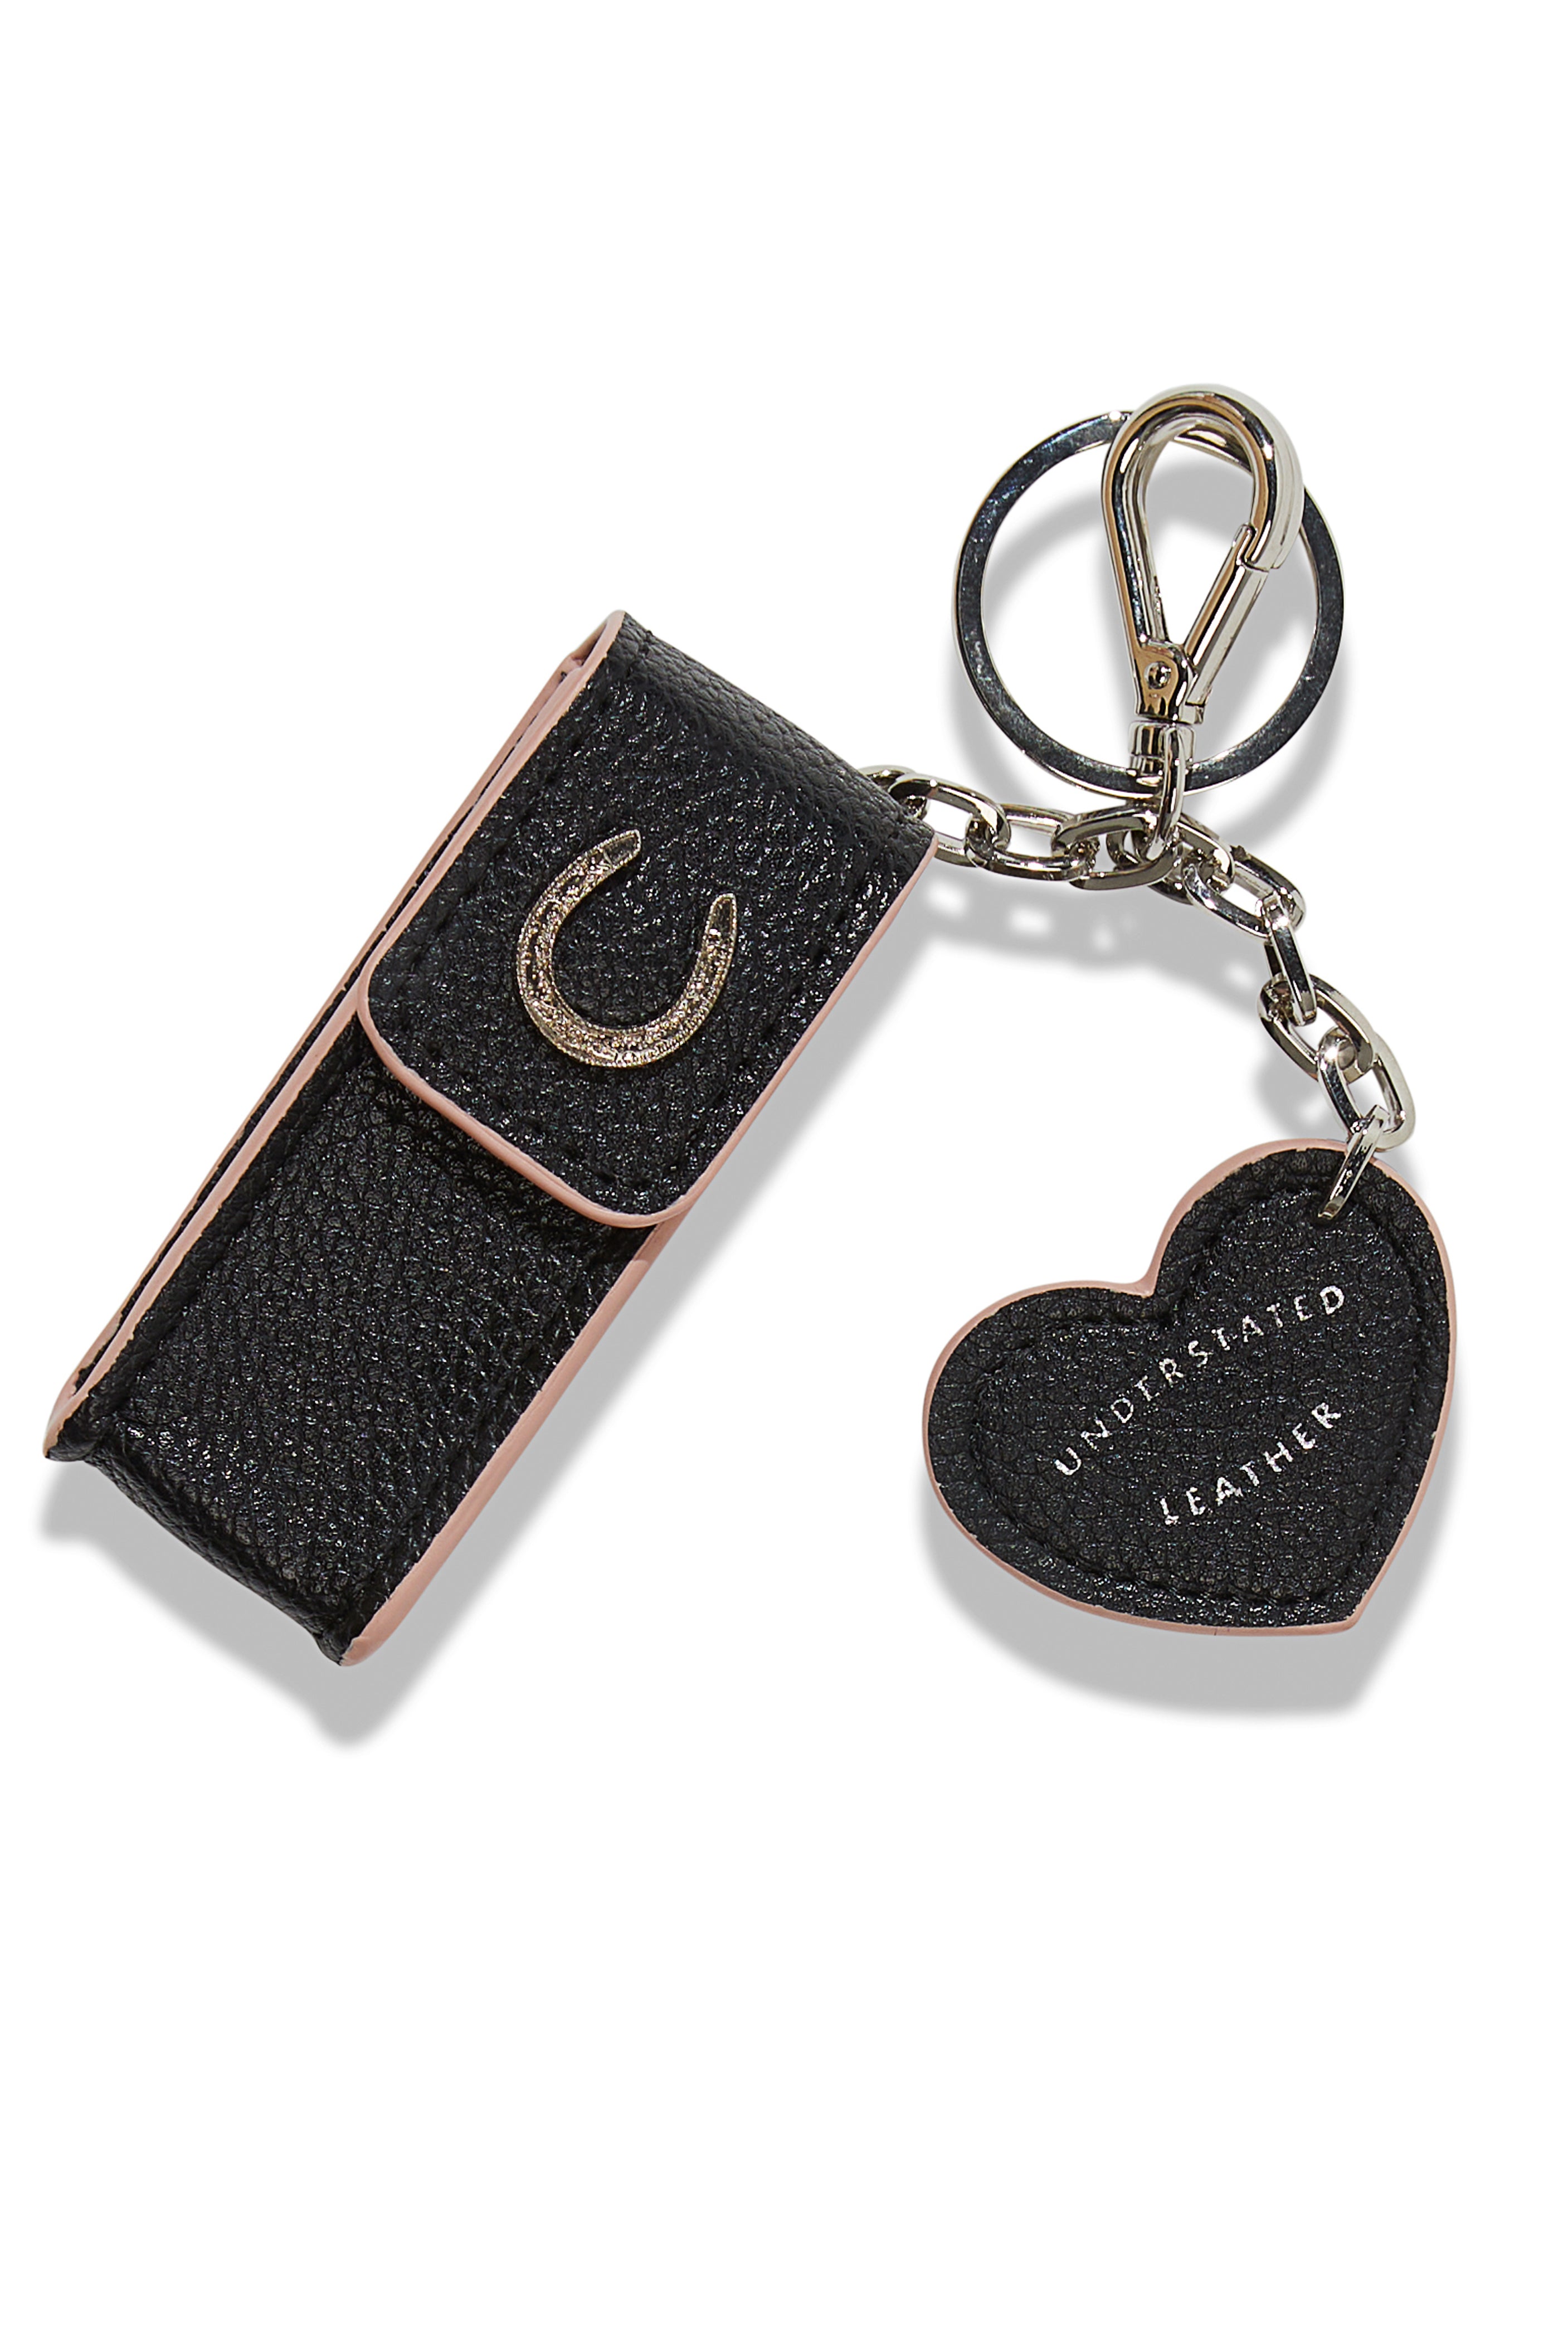 1pc Black & White Contrast Color Pu Leather Lipstick Case With Rhinestone  Decoration, Multi-functional Pouch For Coins, Earphones And Lipstick. It  Can Also Be Used As Keychain For Women